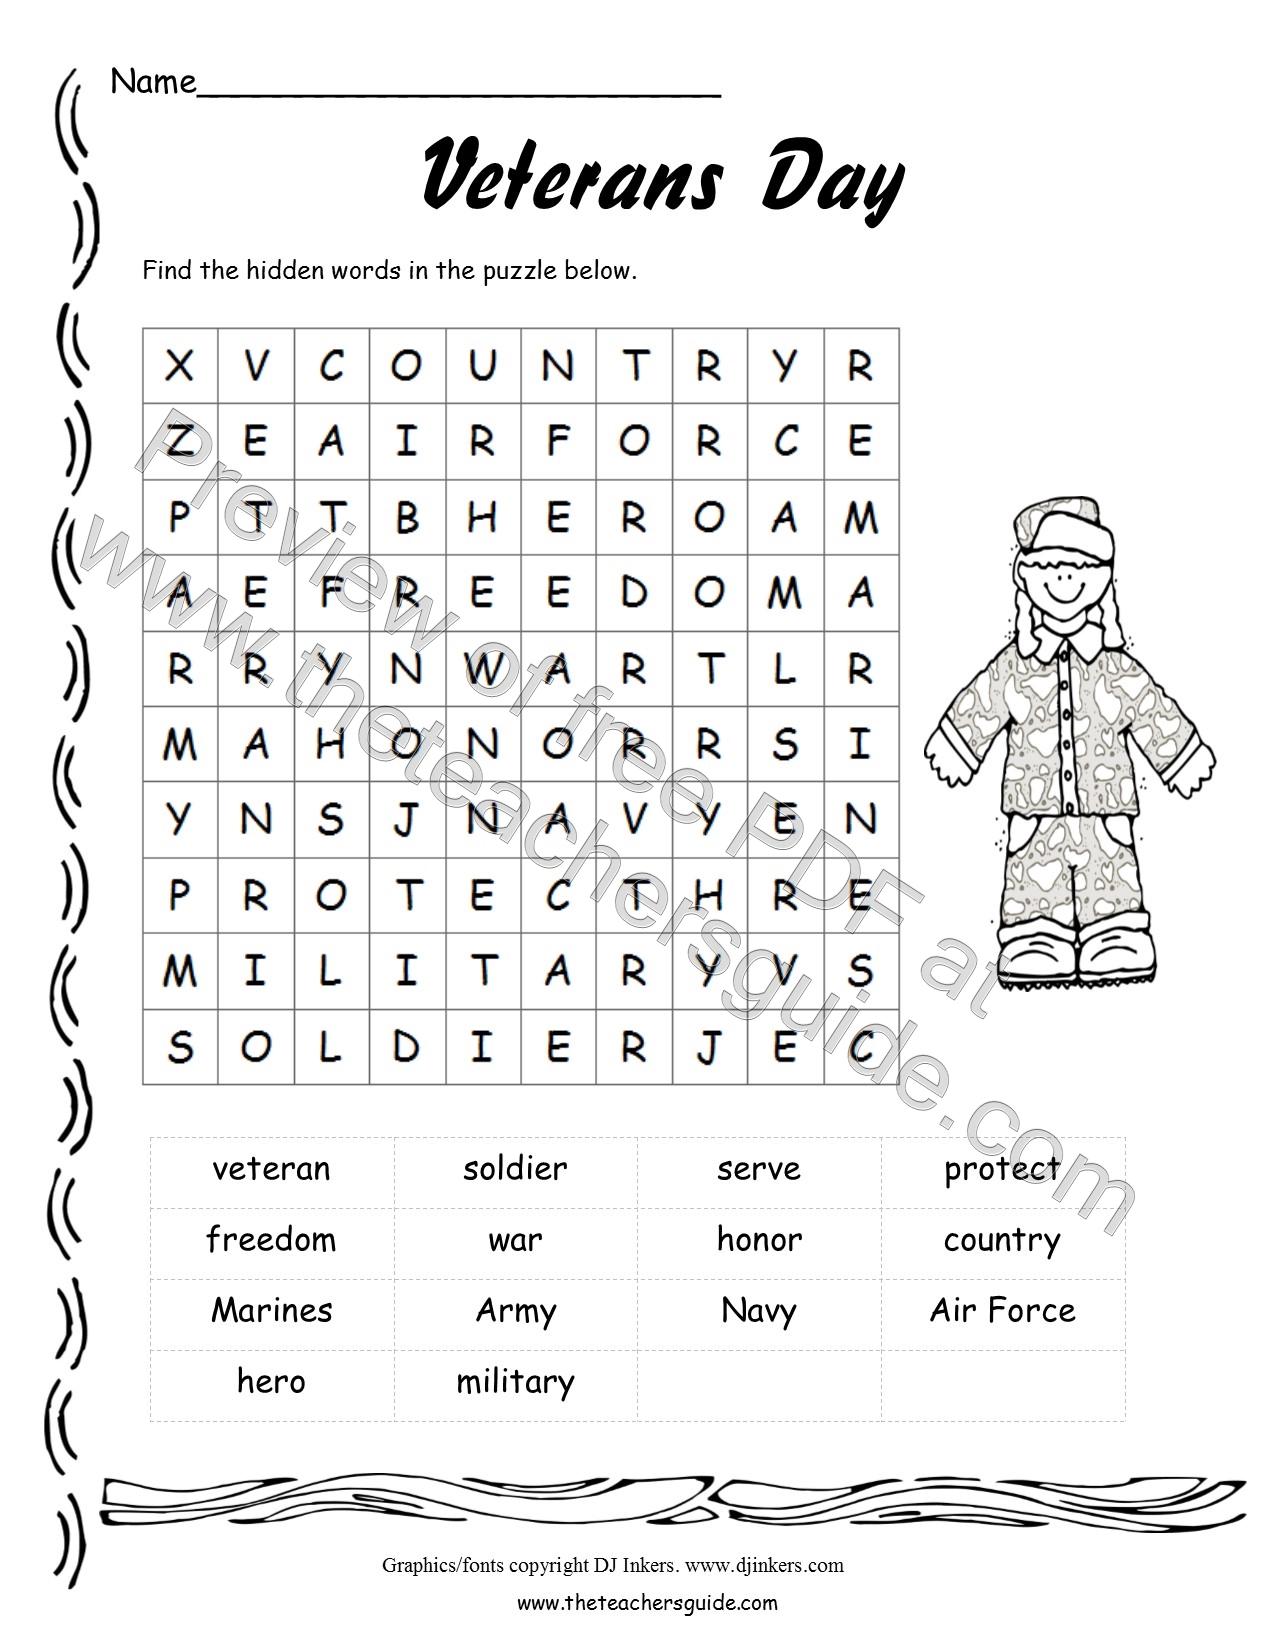 free-printable-veterans-day-word-search-printable-word-searches